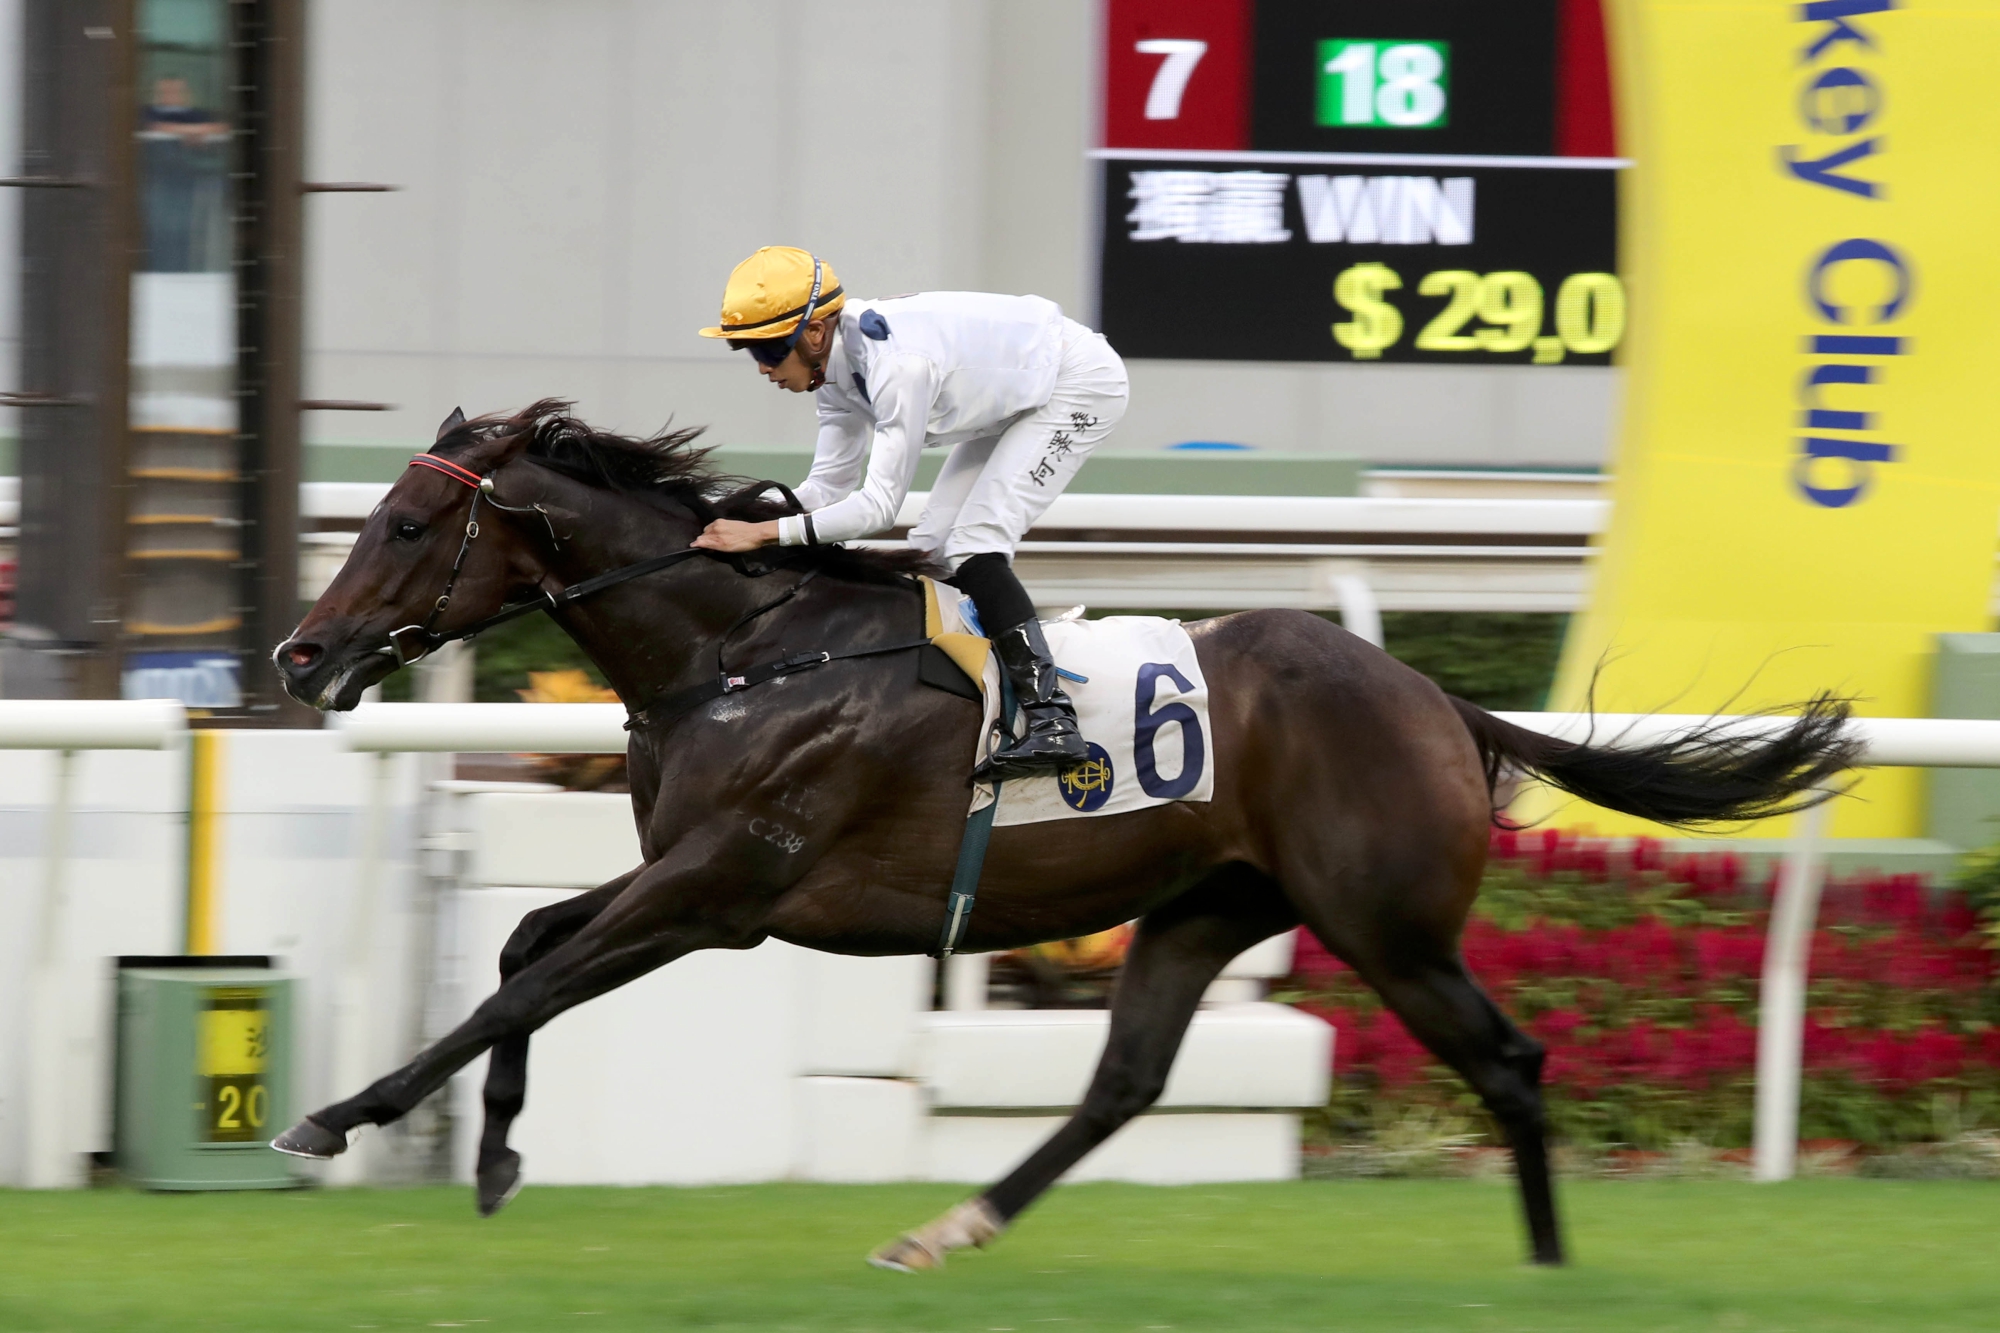 Golden Sixty – HK : Hong Kong’s rising star who has only tasted defeat once; swept Four-Year-Old Classic Series last season; won last 10 races including G3 Celebration Cup, G2 Sha Tin Trophy and G2 Jockey Club Mile.